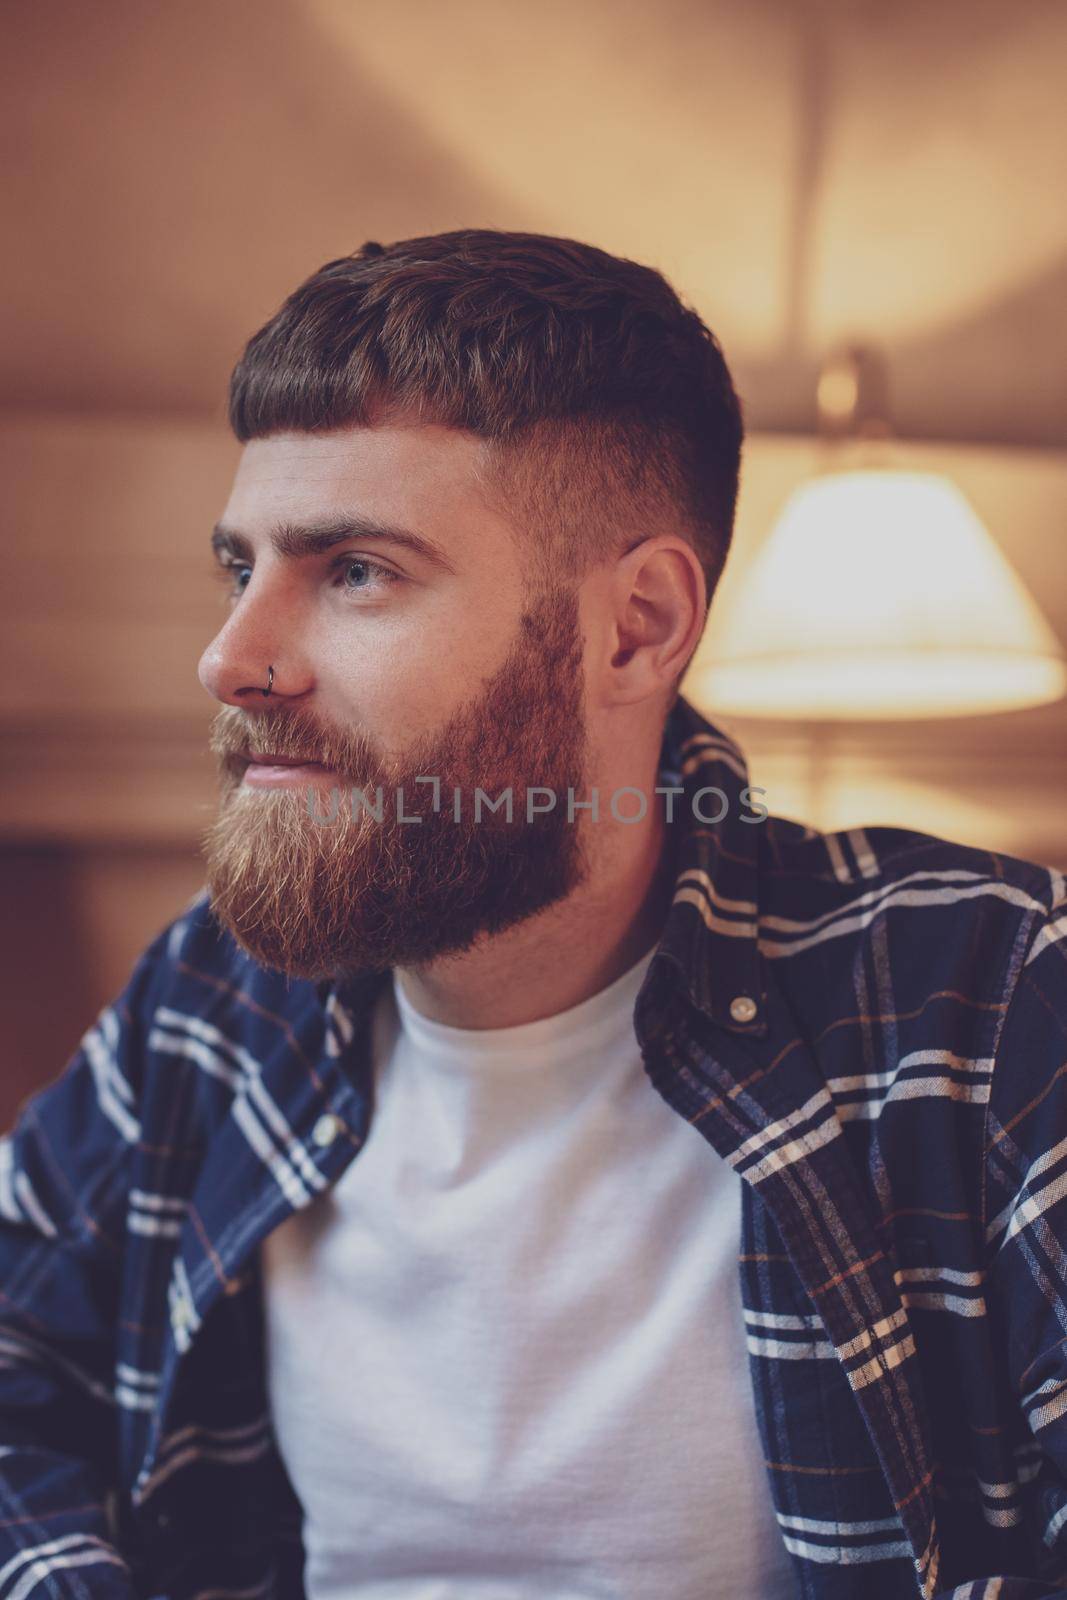 Portrait handsome bearded man wearing plaid shirt at modern cafe. Guy sitting in wooden chair and relaxing.